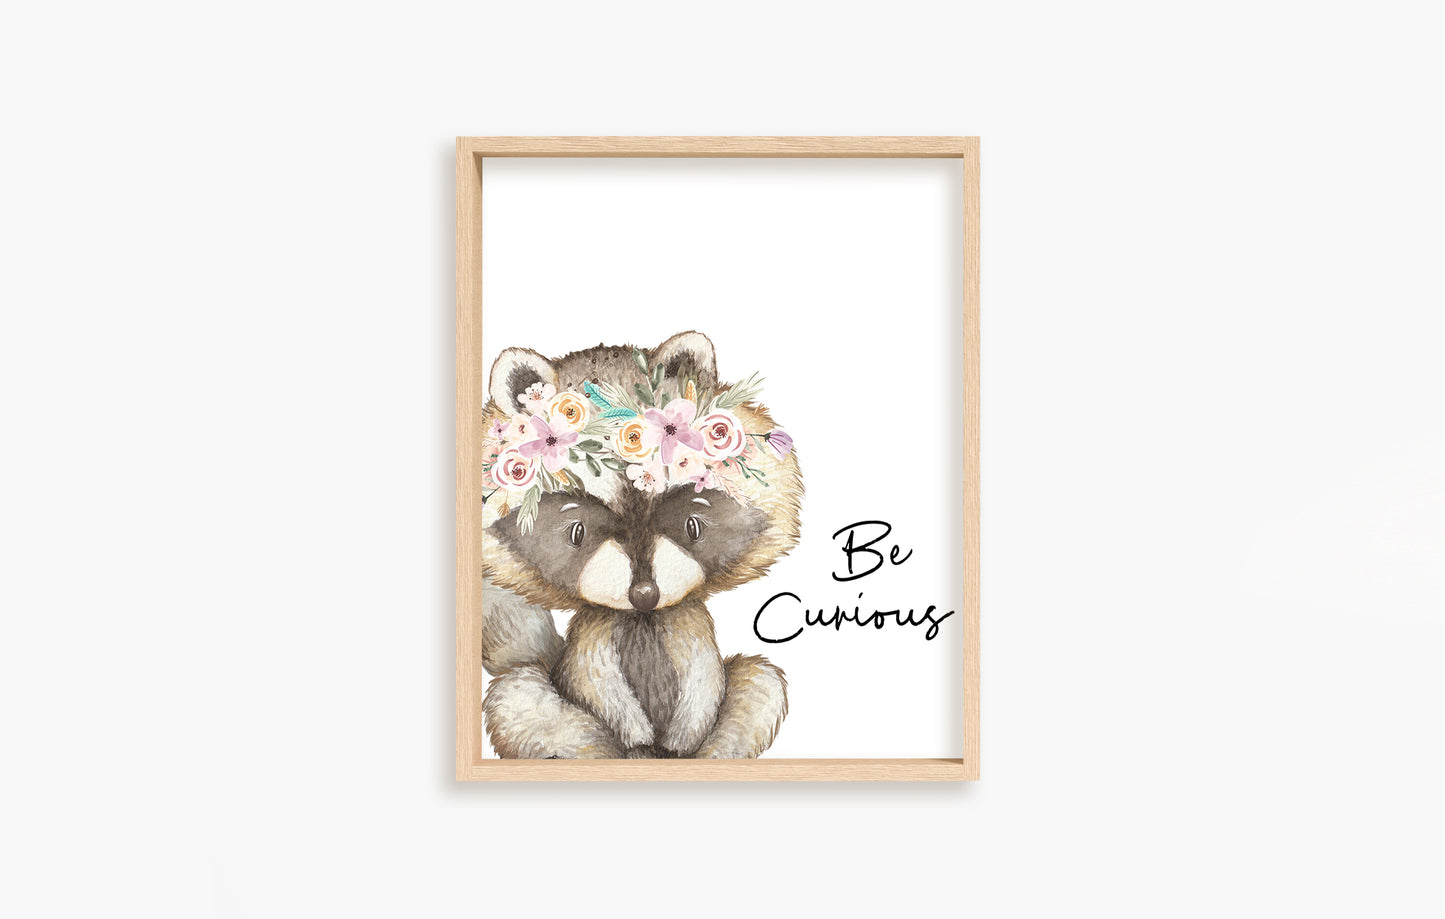 Floral Woodland Animals Wall Art, Girl Forest Nursery Prints - Set of 4 - Forest Friends